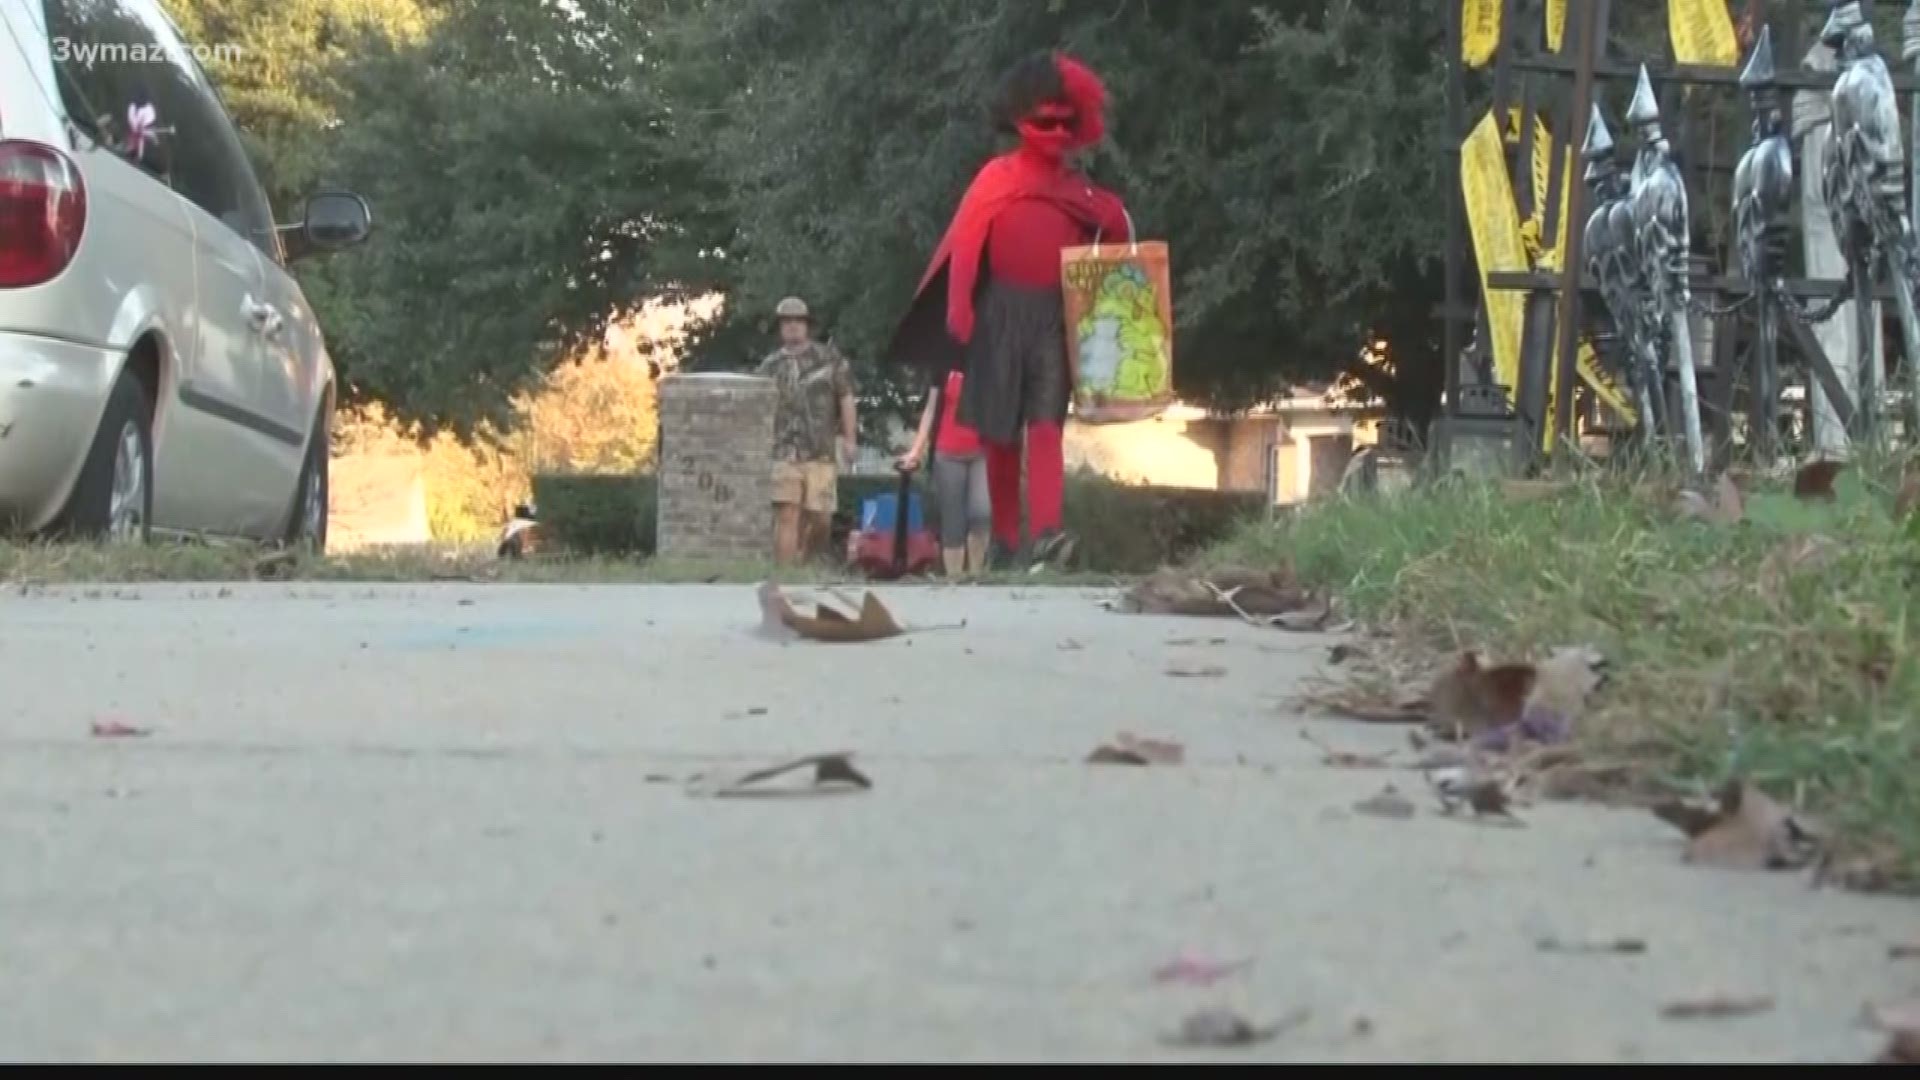 How are sex offenders handled on Halloween in Central Ga.?